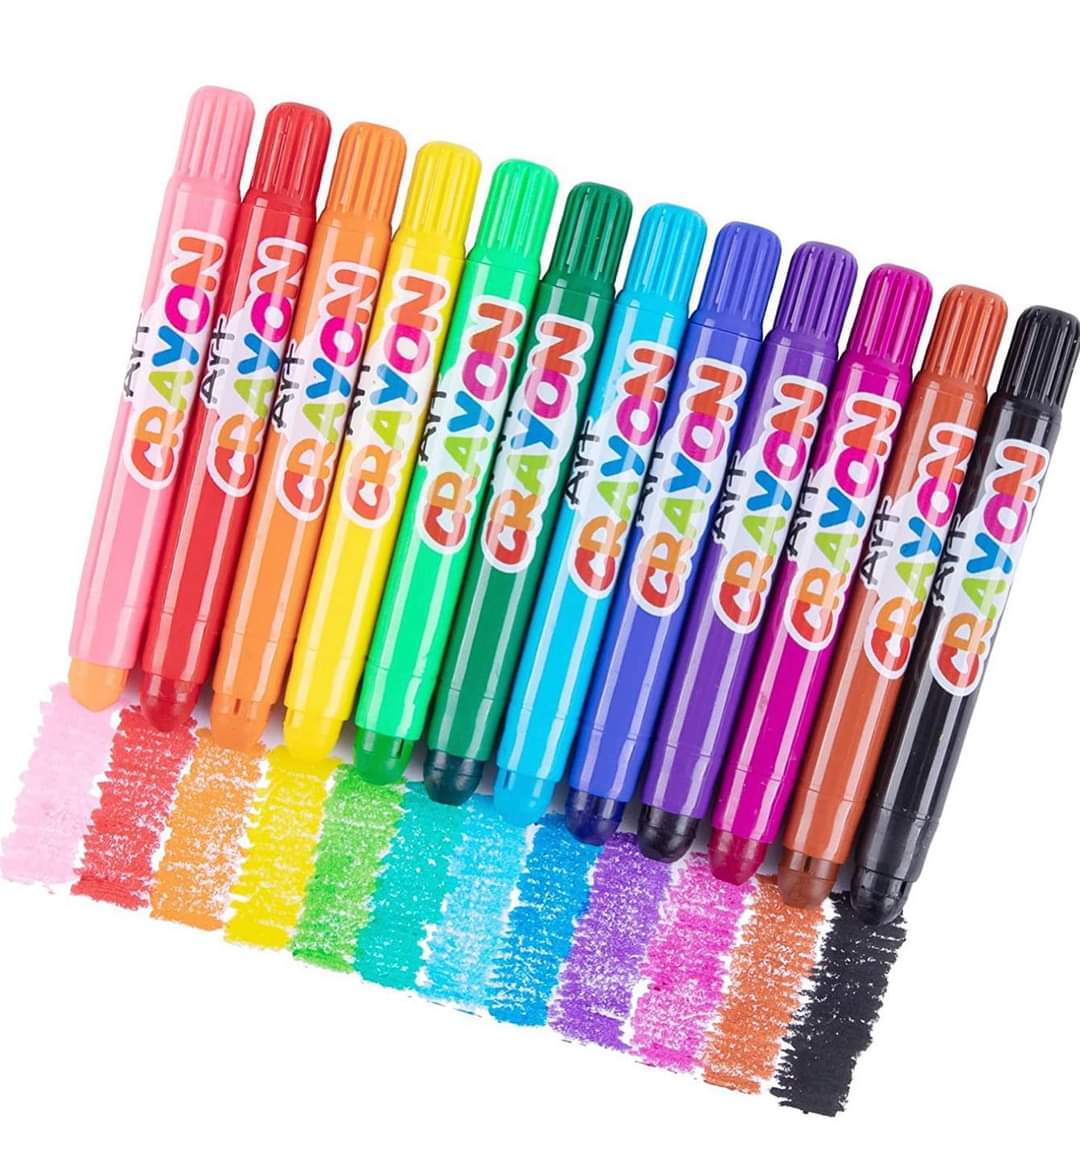 Tookyland Washable Gel Crayons Set - Silky Crayons, Twist Up and Non-Toxic for Toddler Coloring, Arts & Crafts Toy for Kids 3 Year Old +, Size: 24